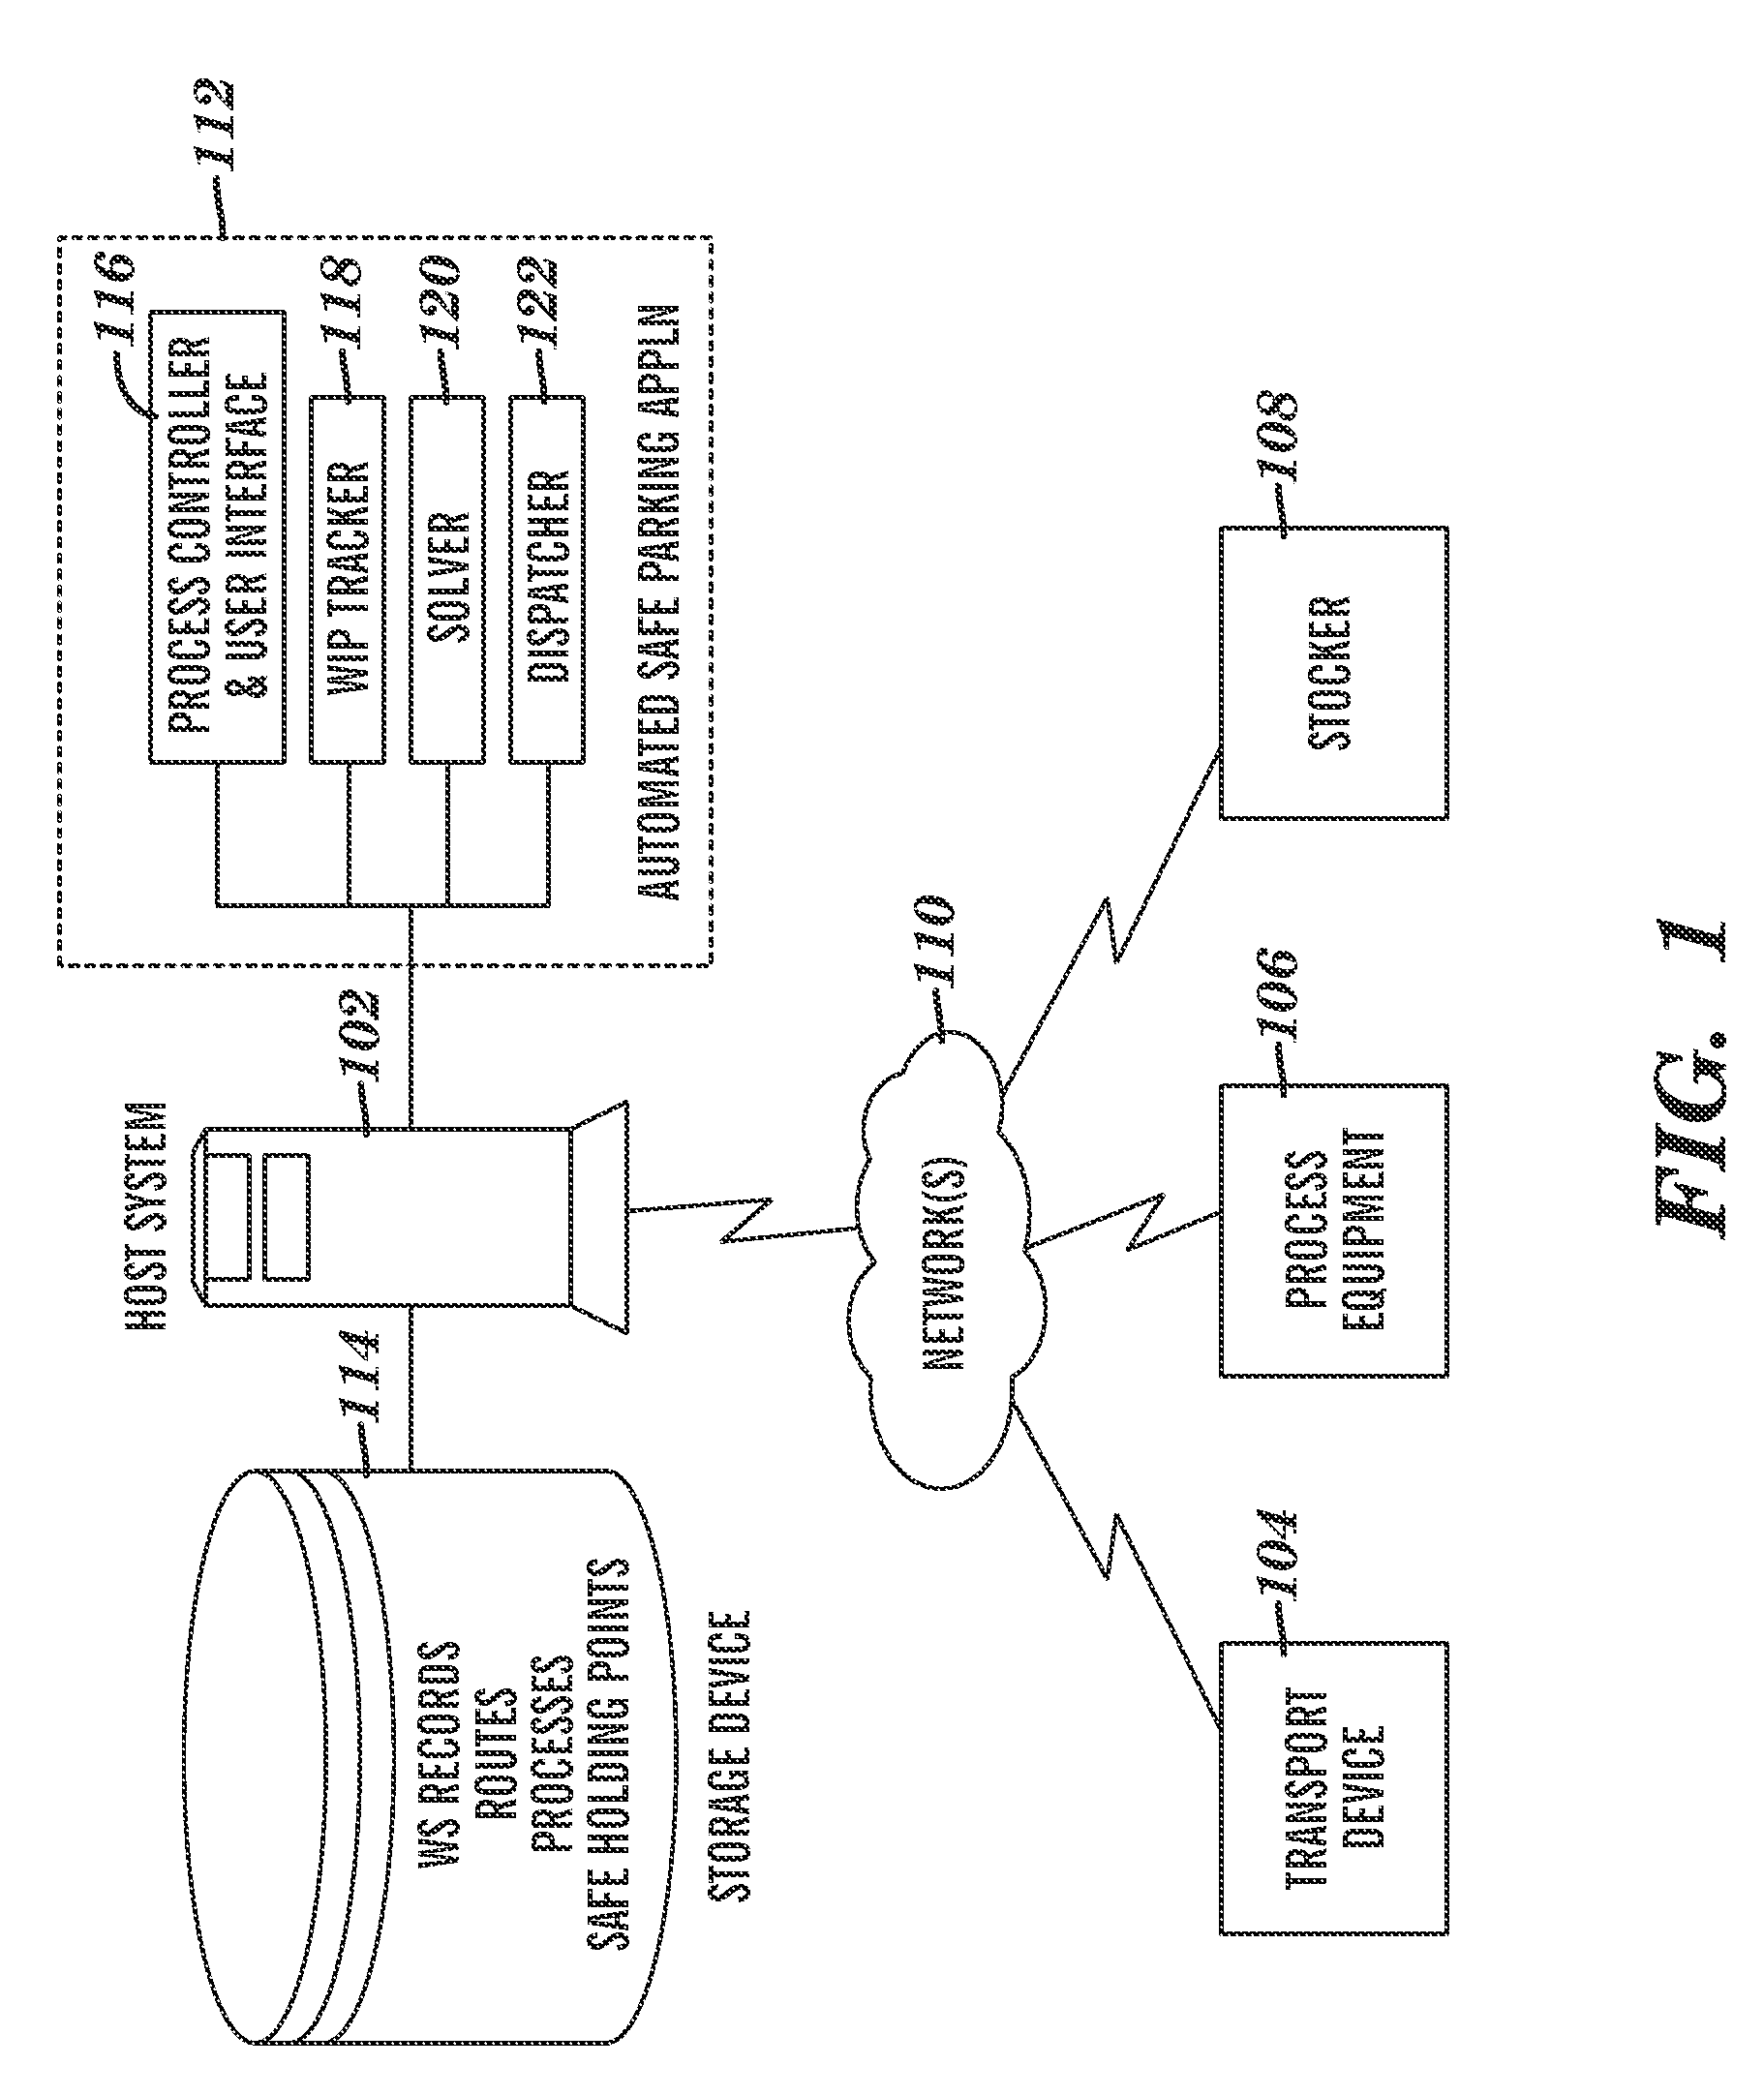 Methods, systems, and computer program products for managing movement of work-in-process materials in an automated manufacturing environment